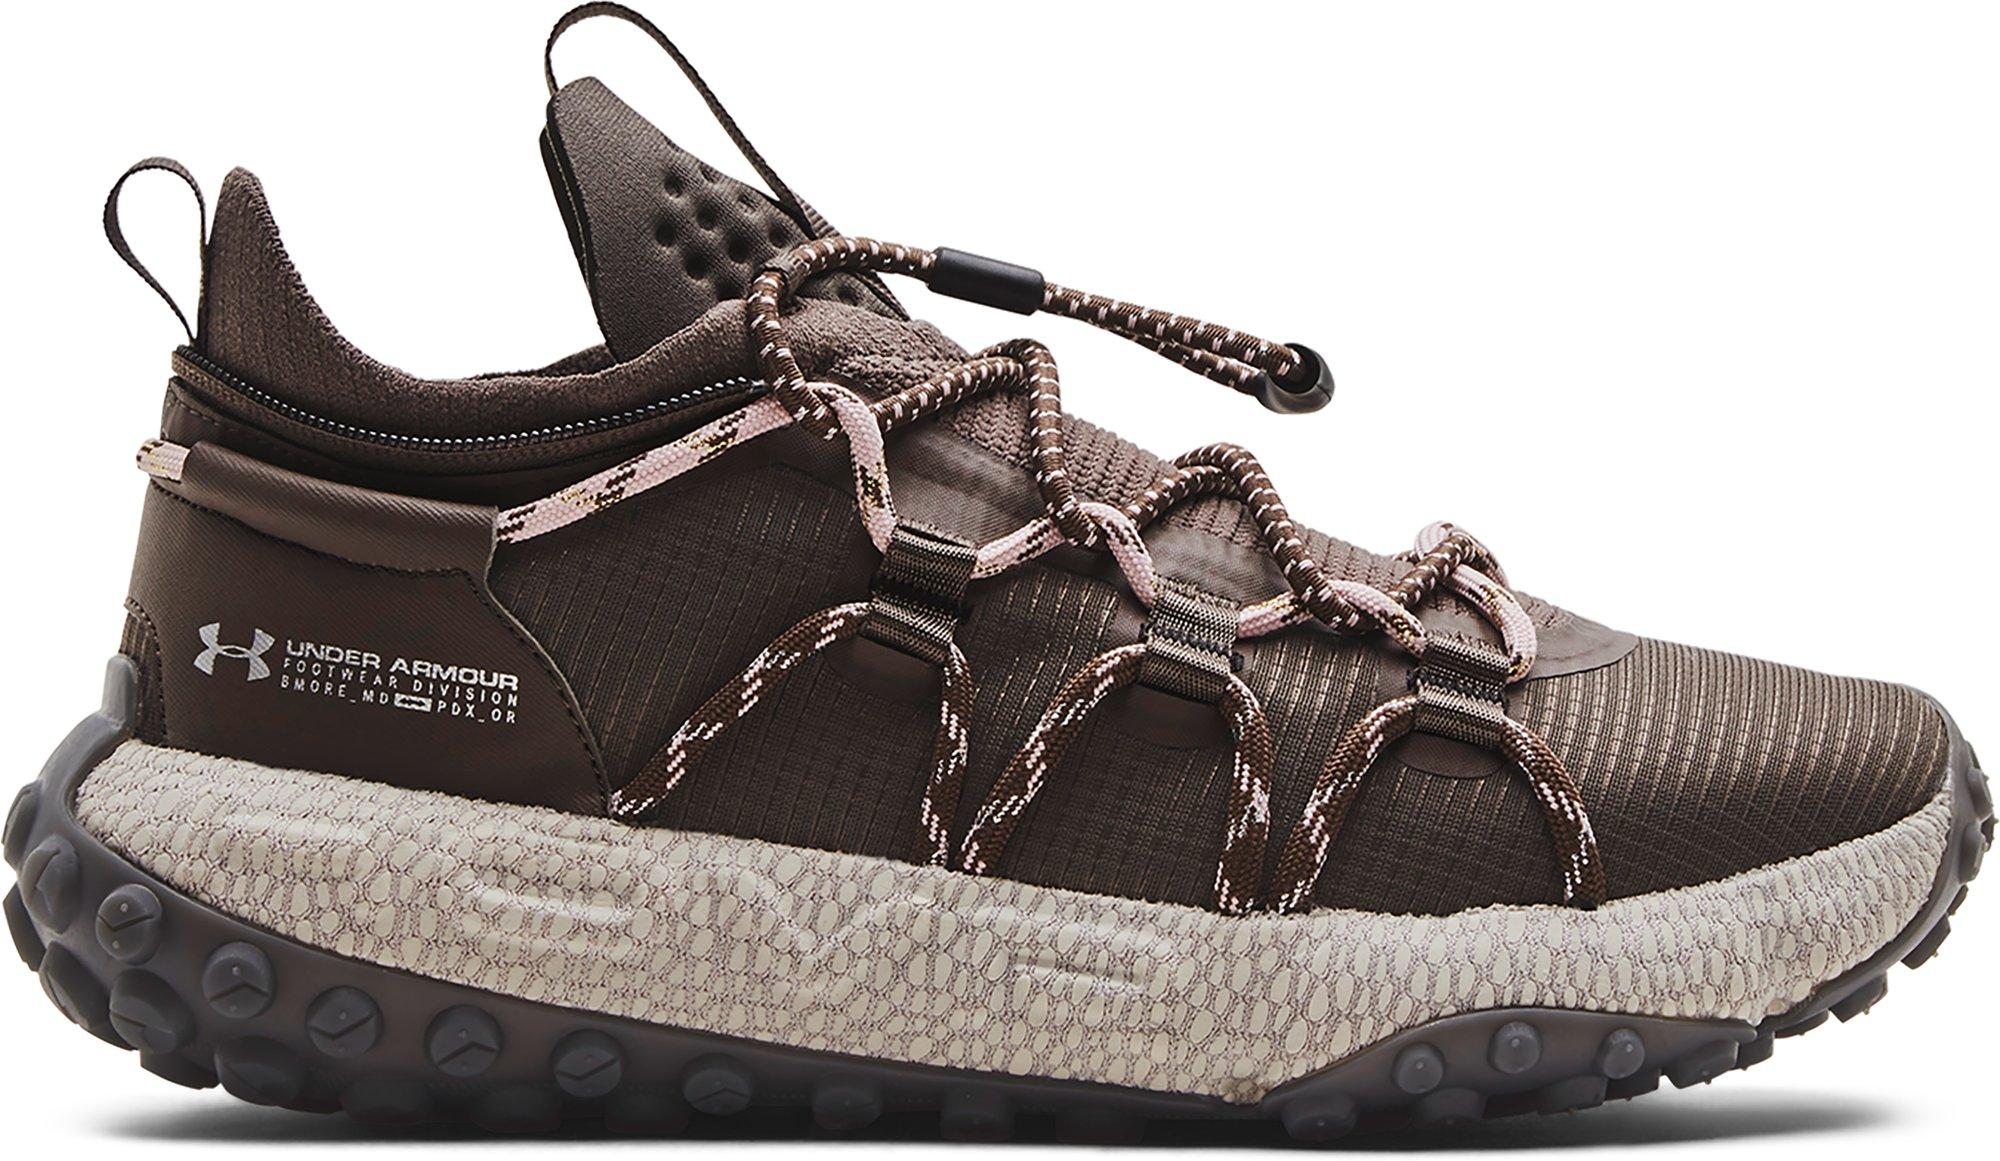 Under Armour Ua Hovr Summit Fat Tire Cuff Running Shoes in Brown | Lyst